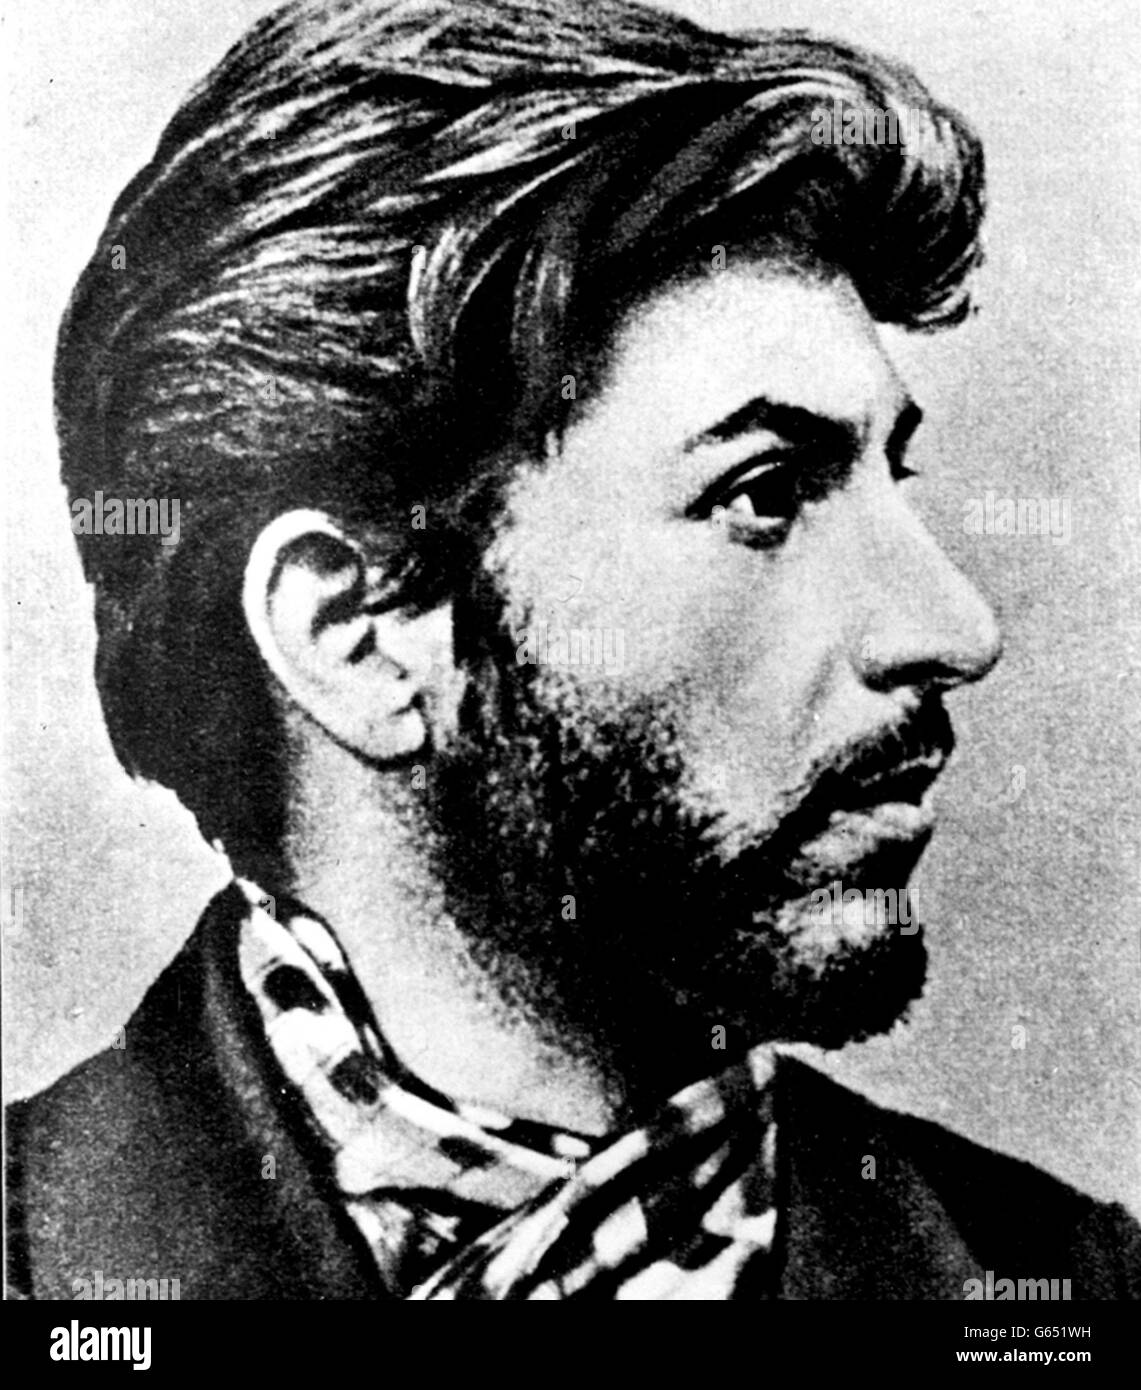 DECEMBER 21st: Joseph Stalin pictured as a young man of 25. The photograph was made at the beginning of Stalin's revolutionary career when he wore a beard to elude the Tsar's police. Stock Photo